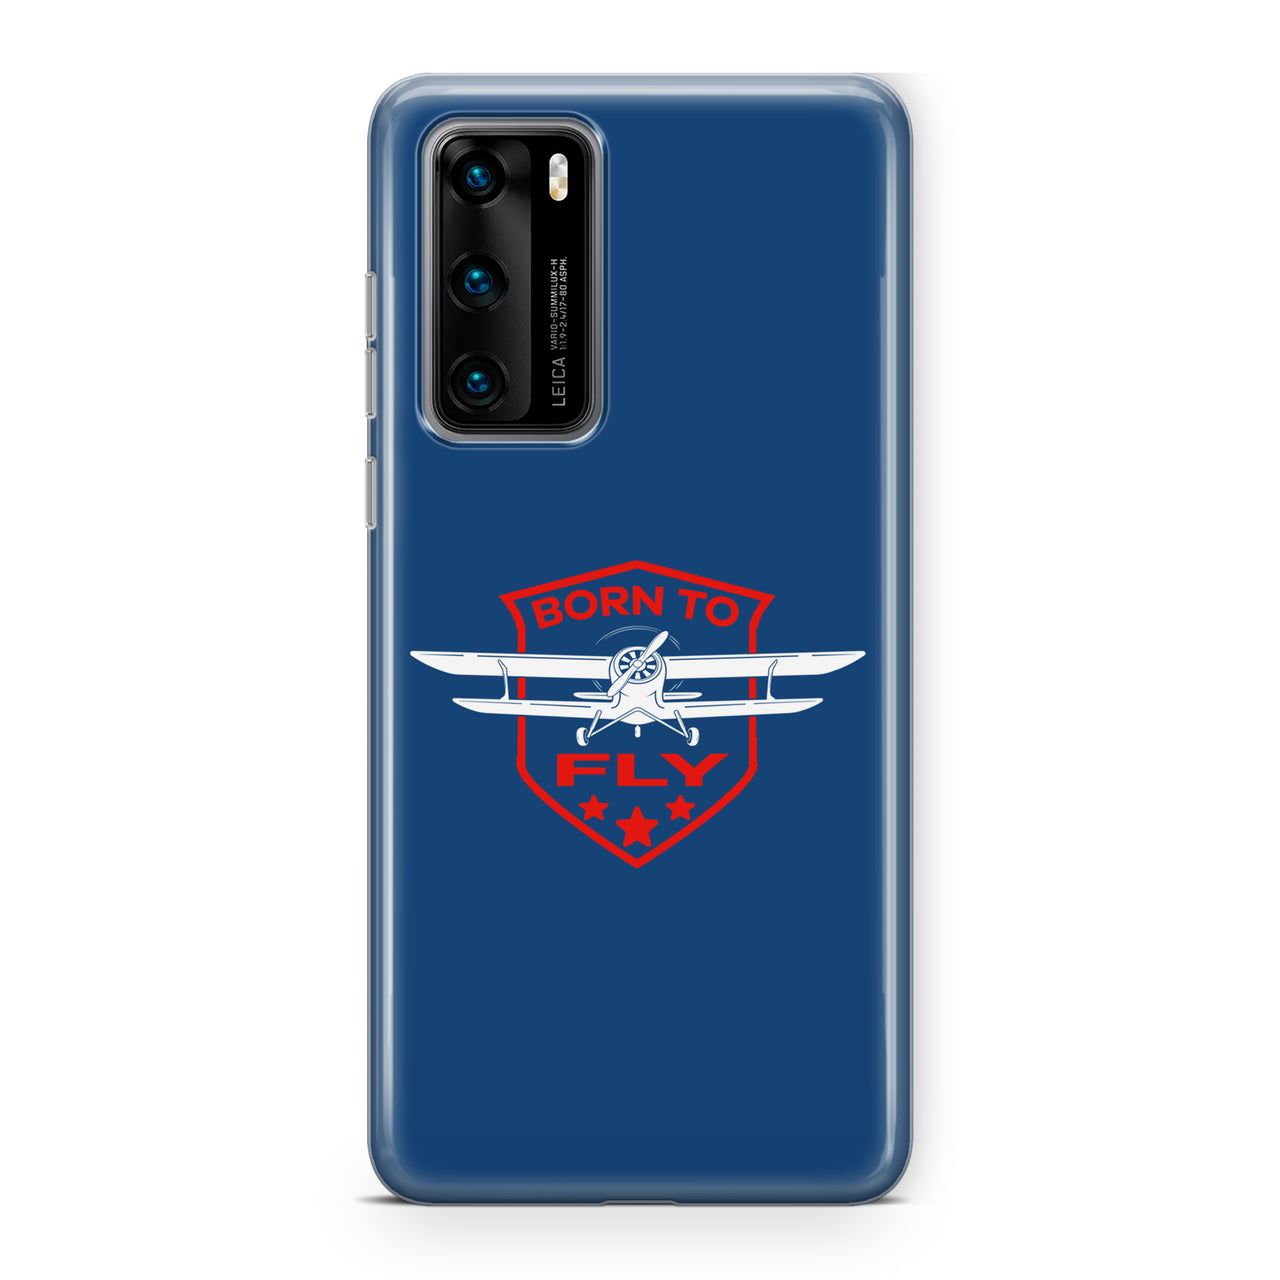 Born To Fly Designed Huawei Cases